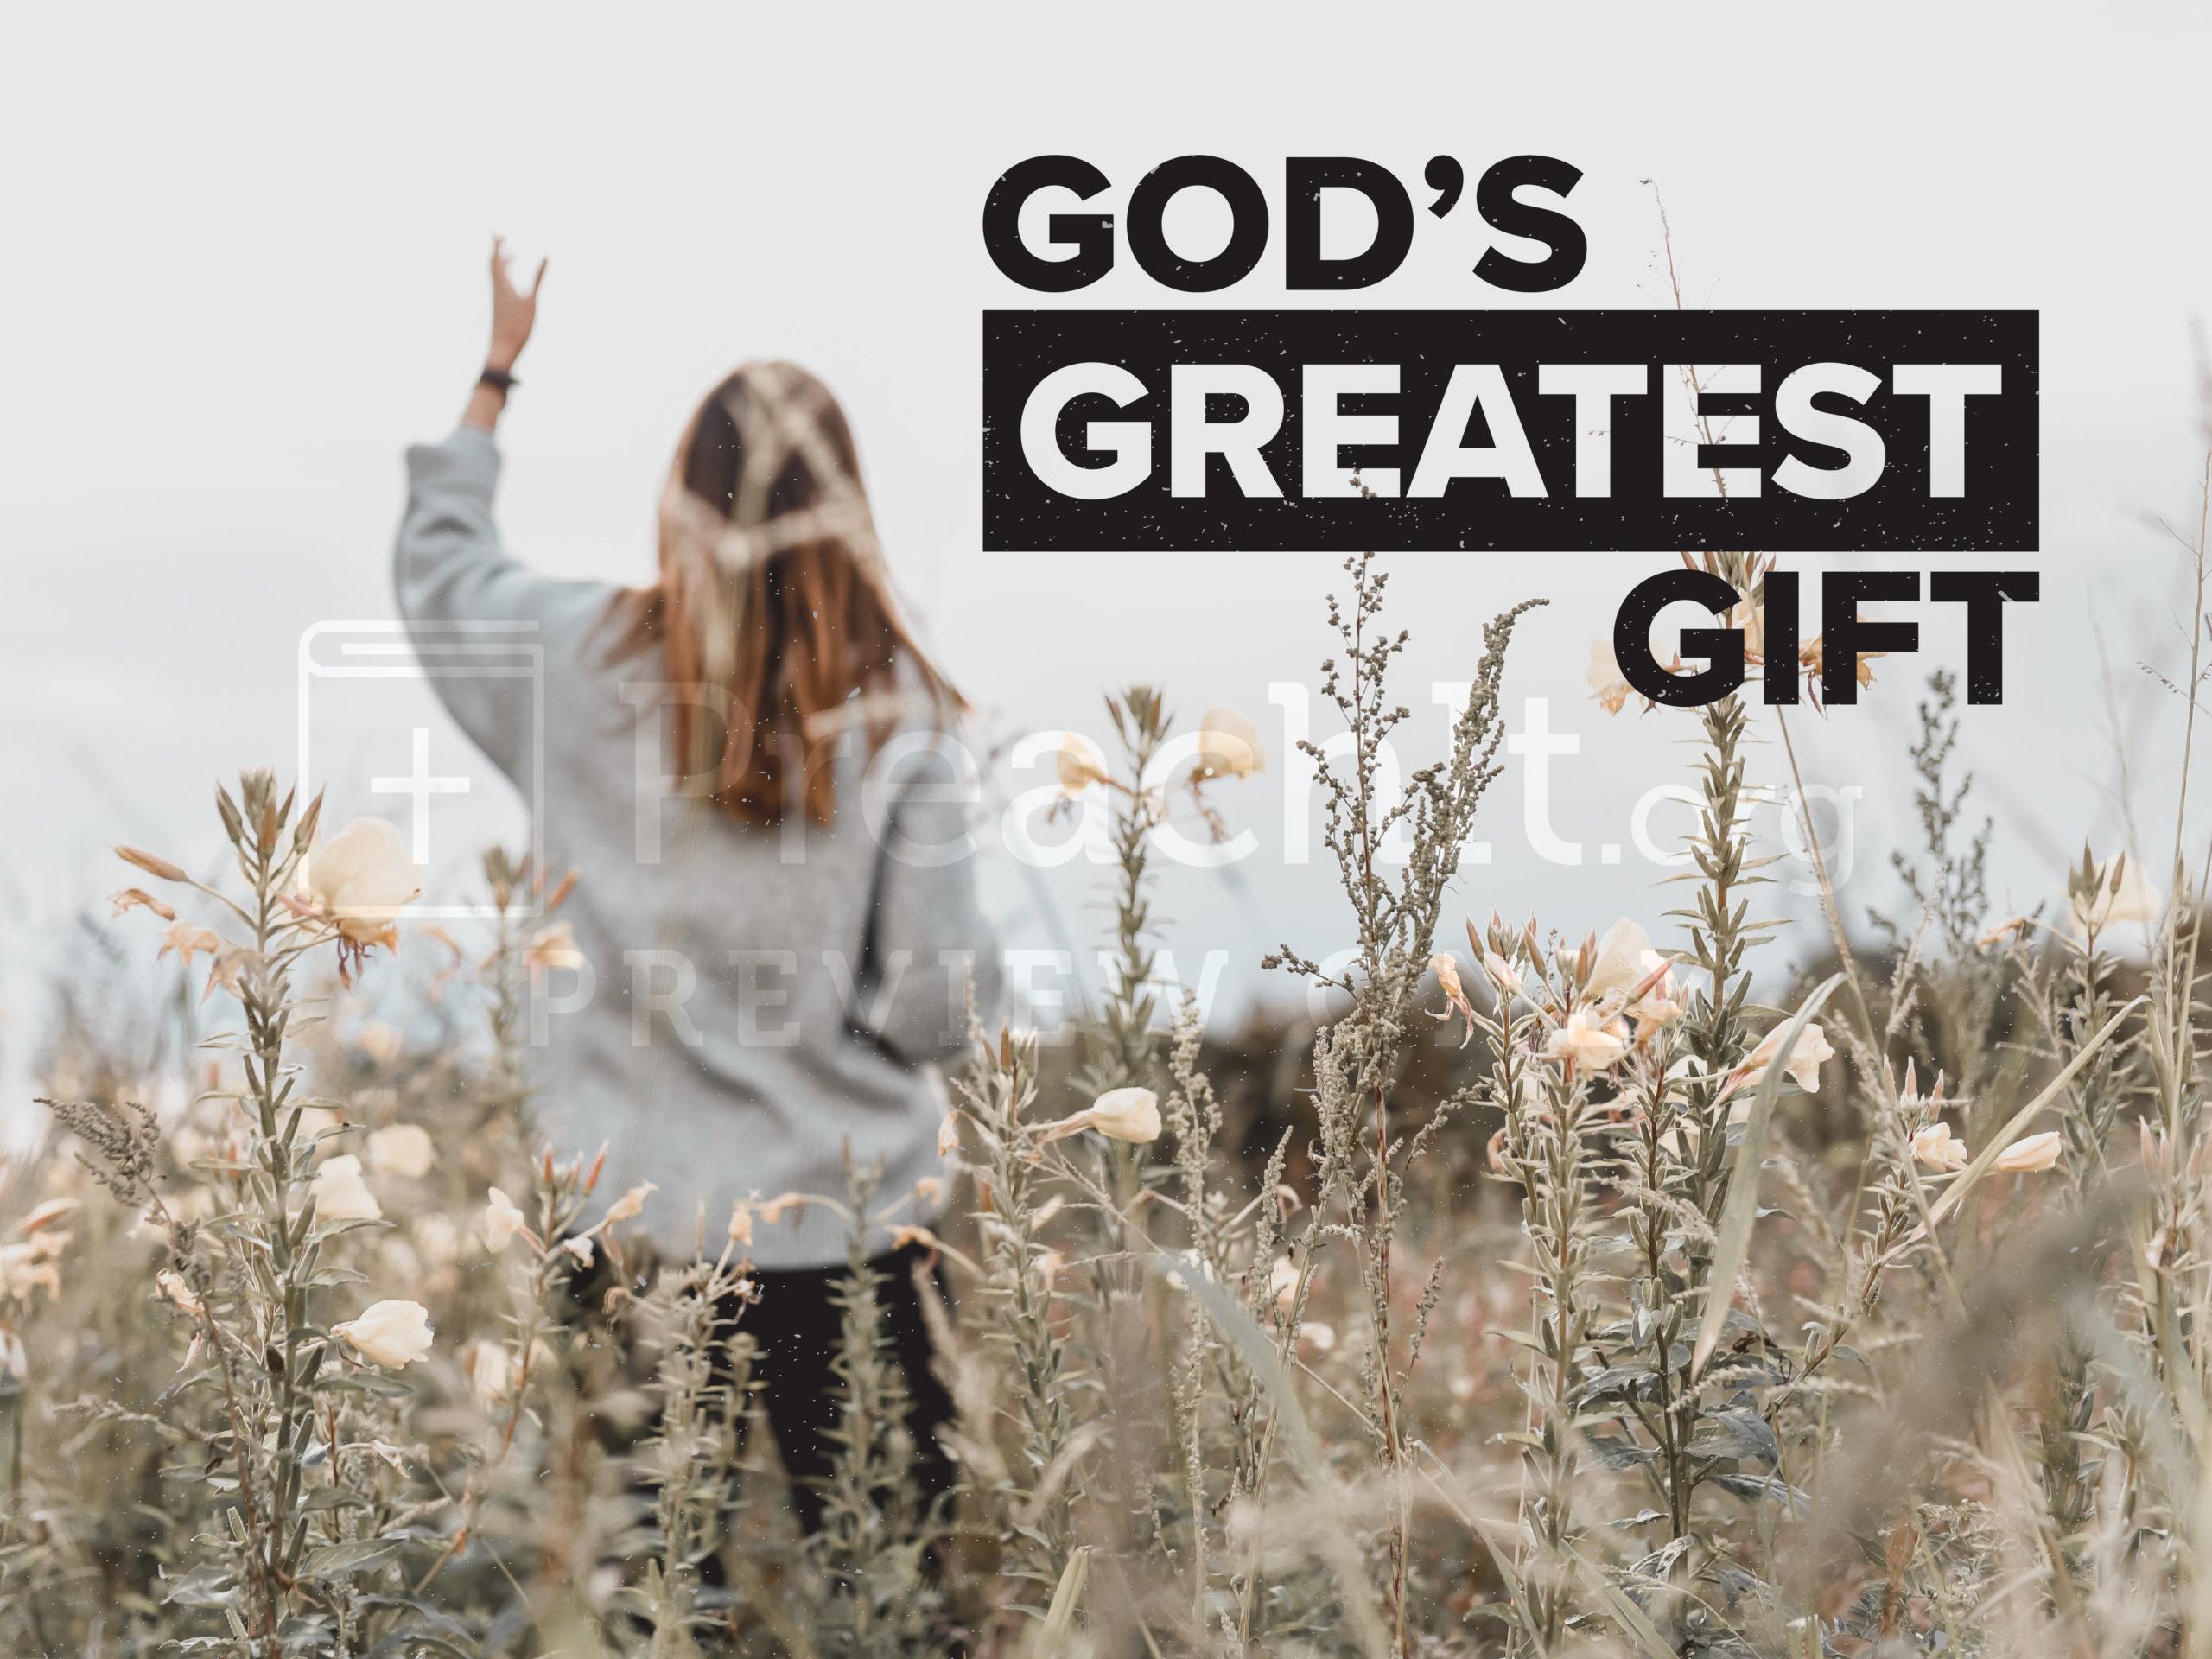 Lesson 2: Do You See What I See - God's Greatest Gift